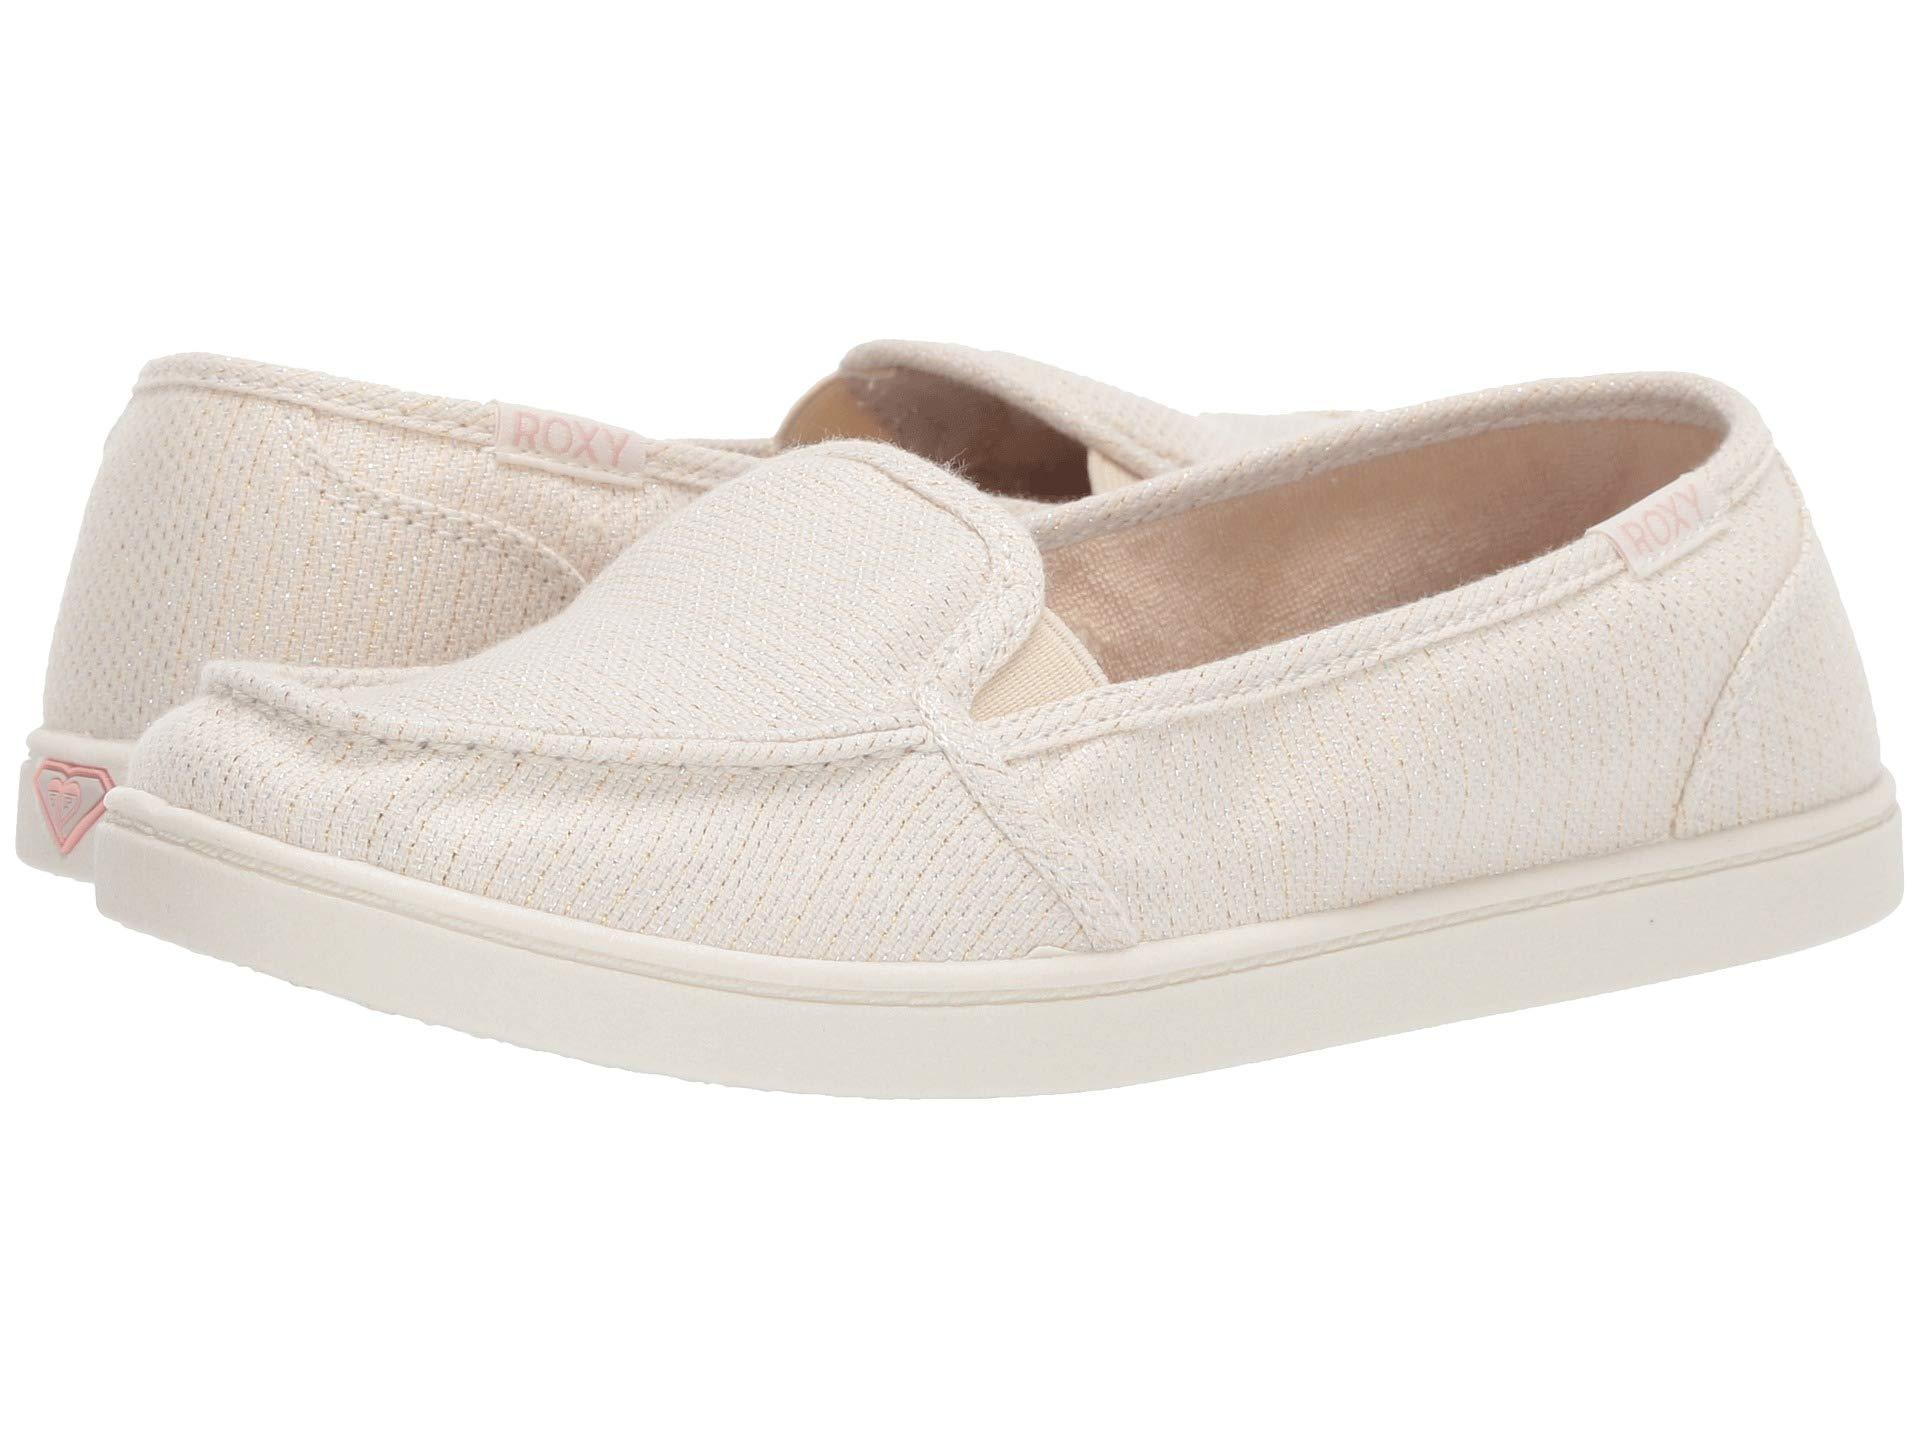 Lyst - Roxy Minnow Vi (cream) Women's Slip On Shoes in Natural - Save 15%